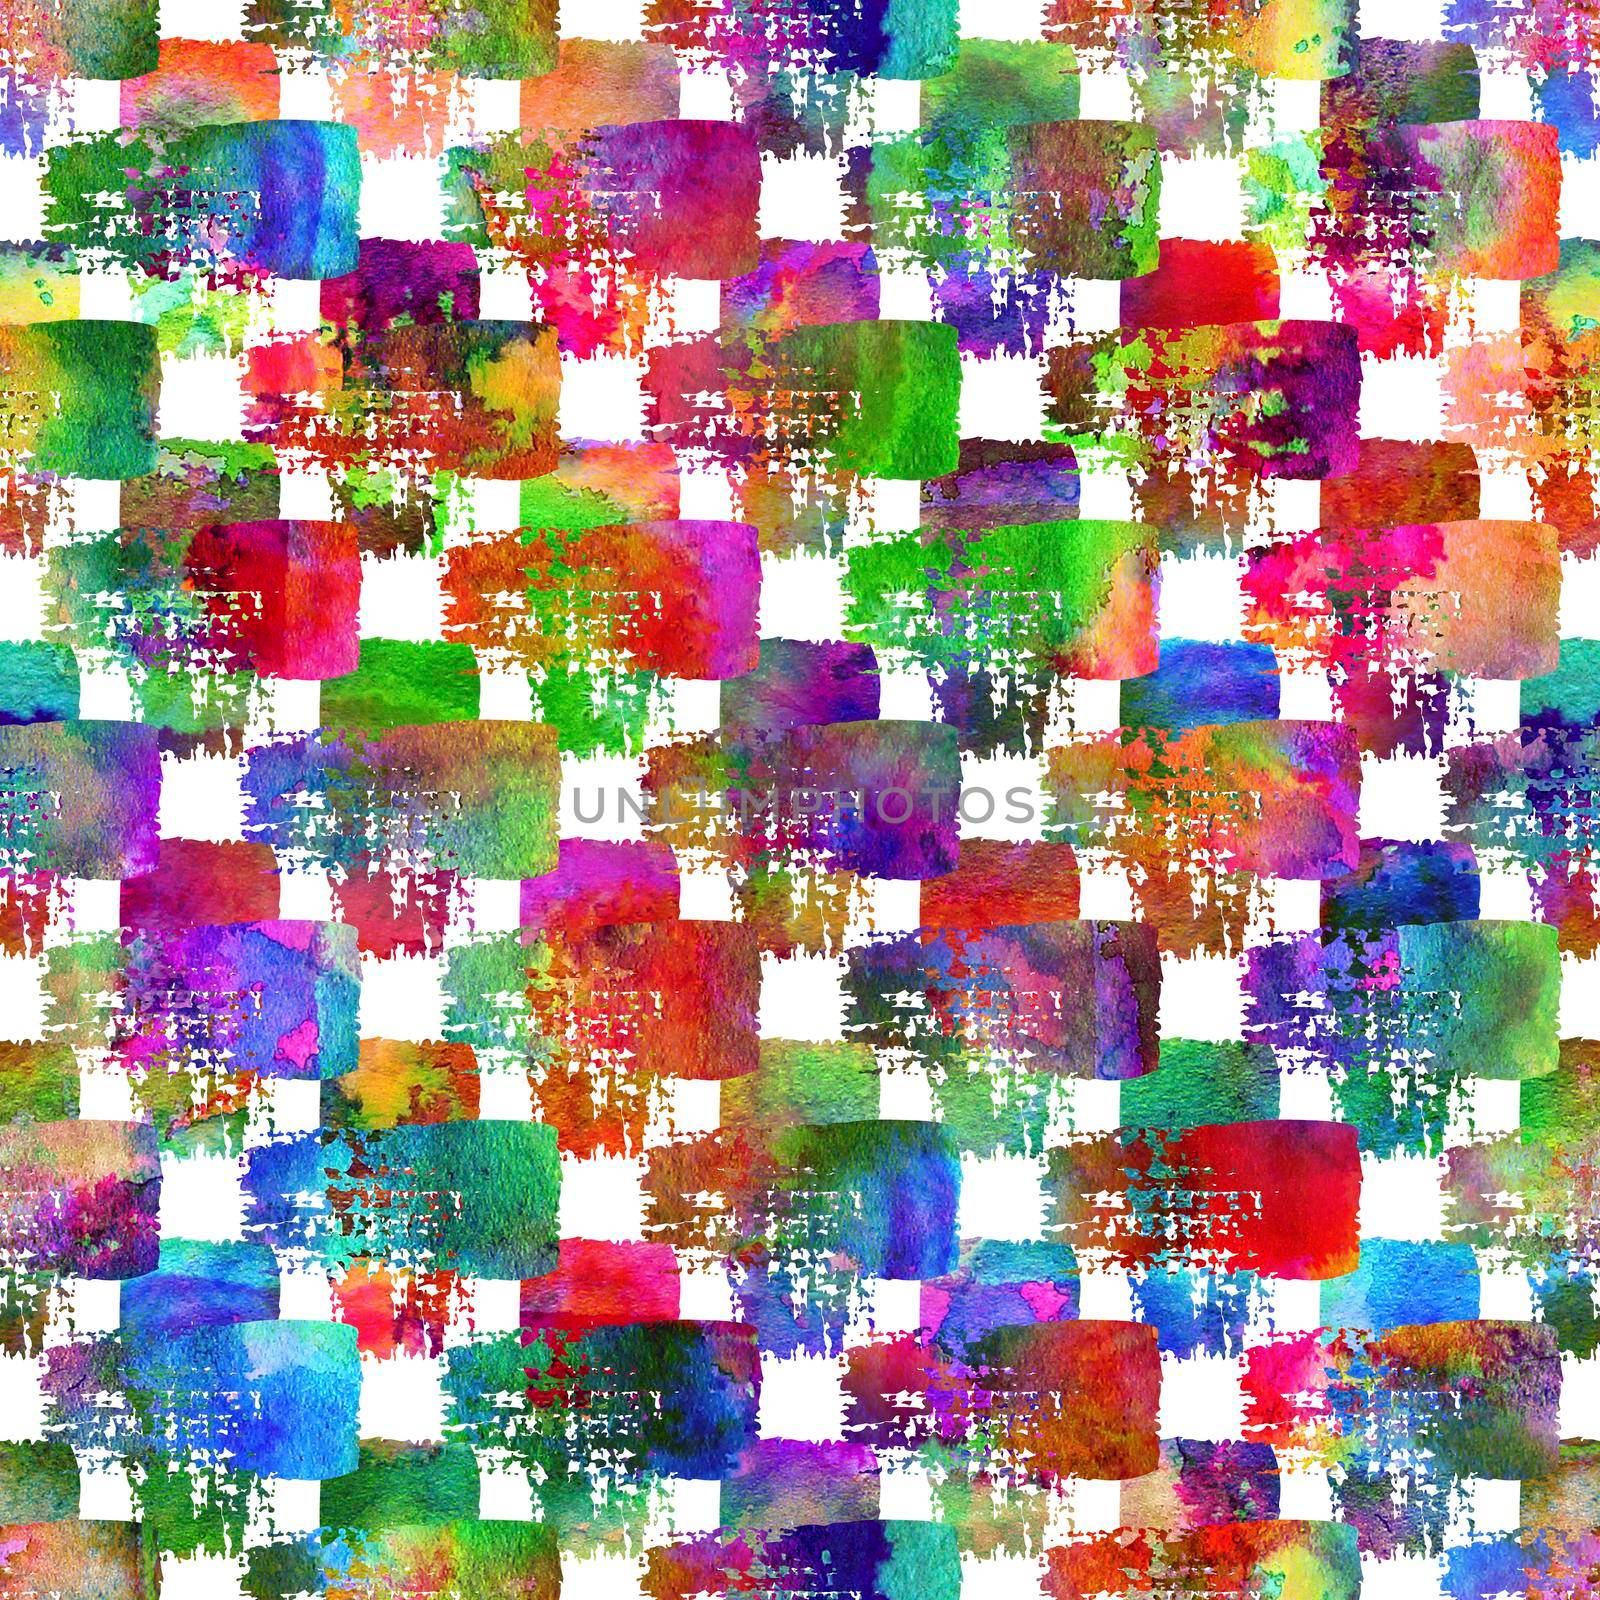 Watercolor Brush Plaid Seamless Pattern Grange Check Geometric Design in Rainbow Color. Modern Strokes Grung Collage Background for kids fabric and textile.